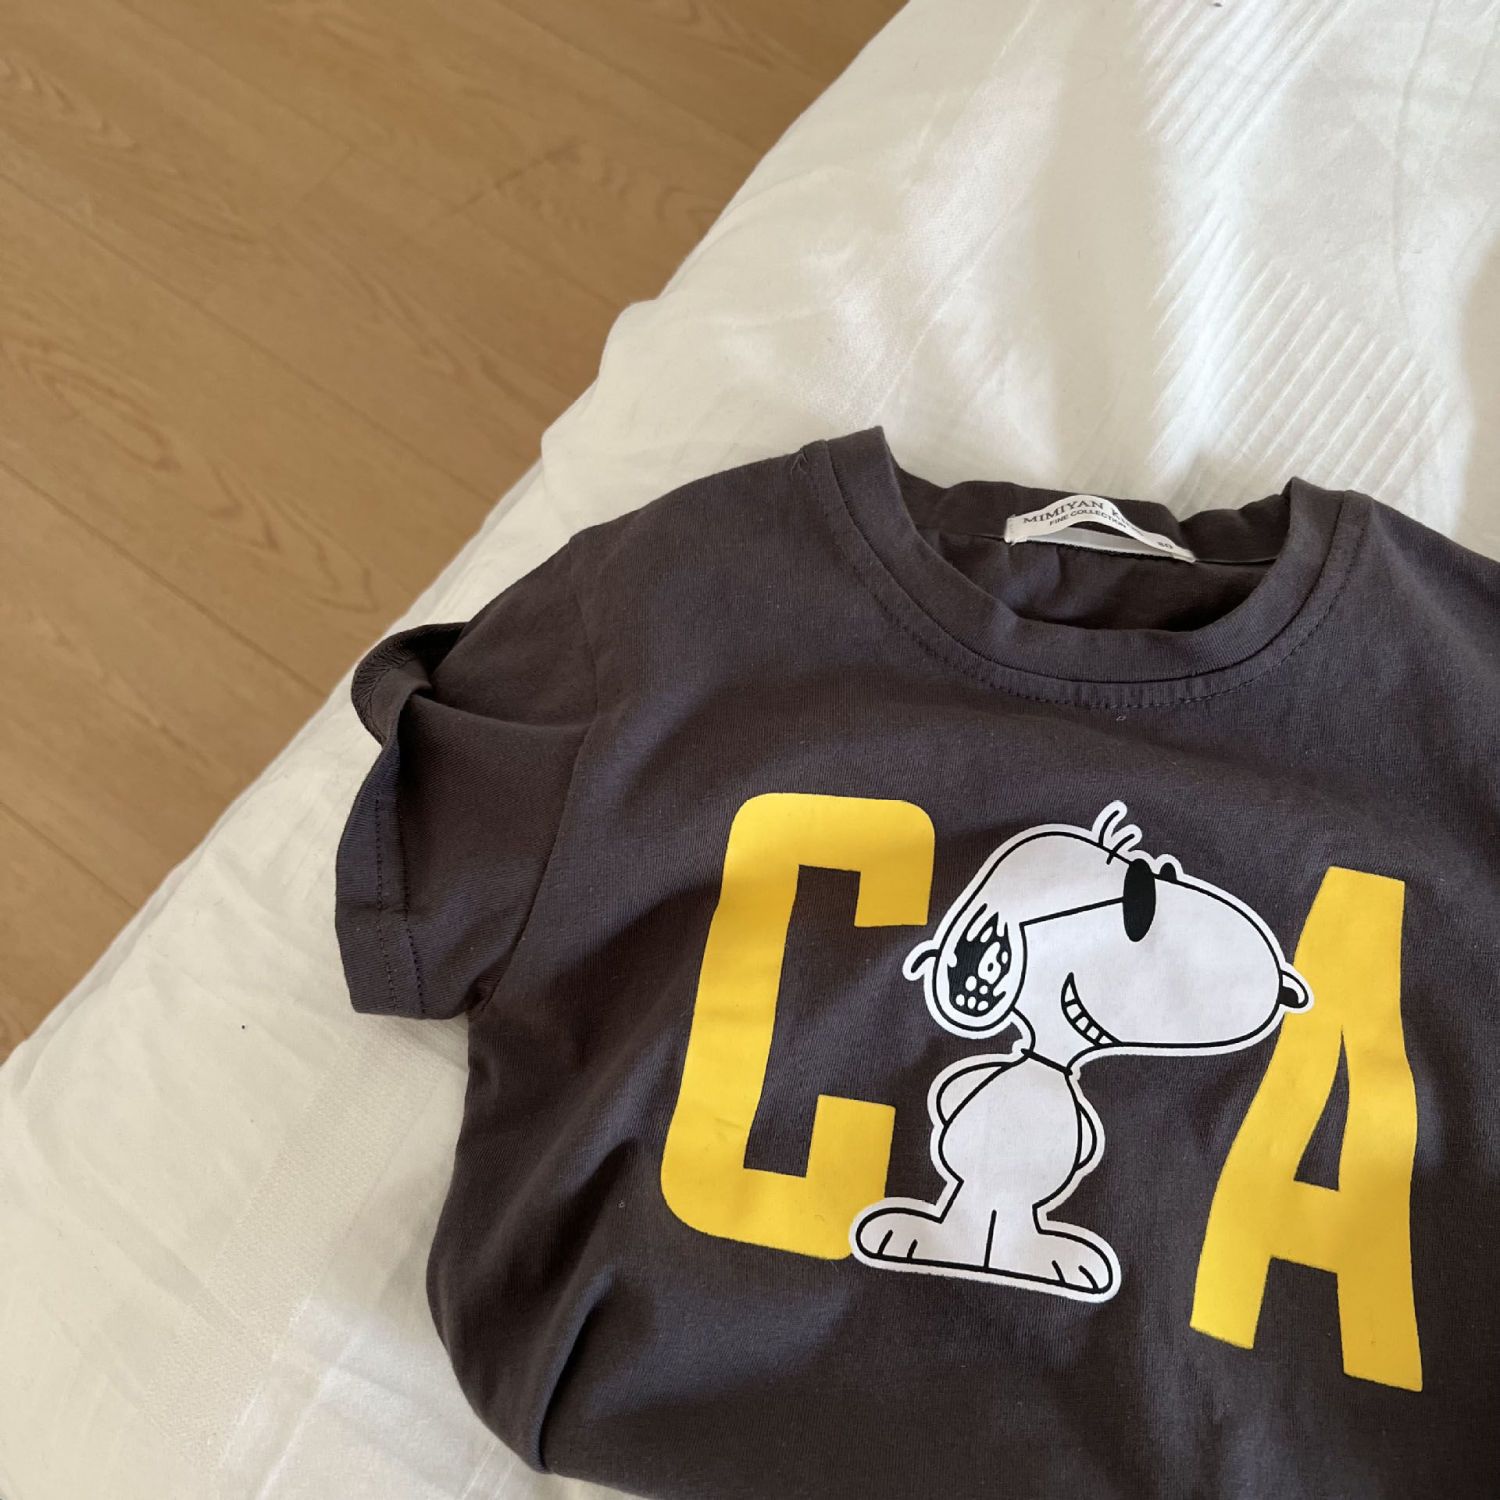 Children's clothing 2022 summer children's cotton short-sleeved boys and girls cartoon Snoopy letter t baby casual loose T-shirt